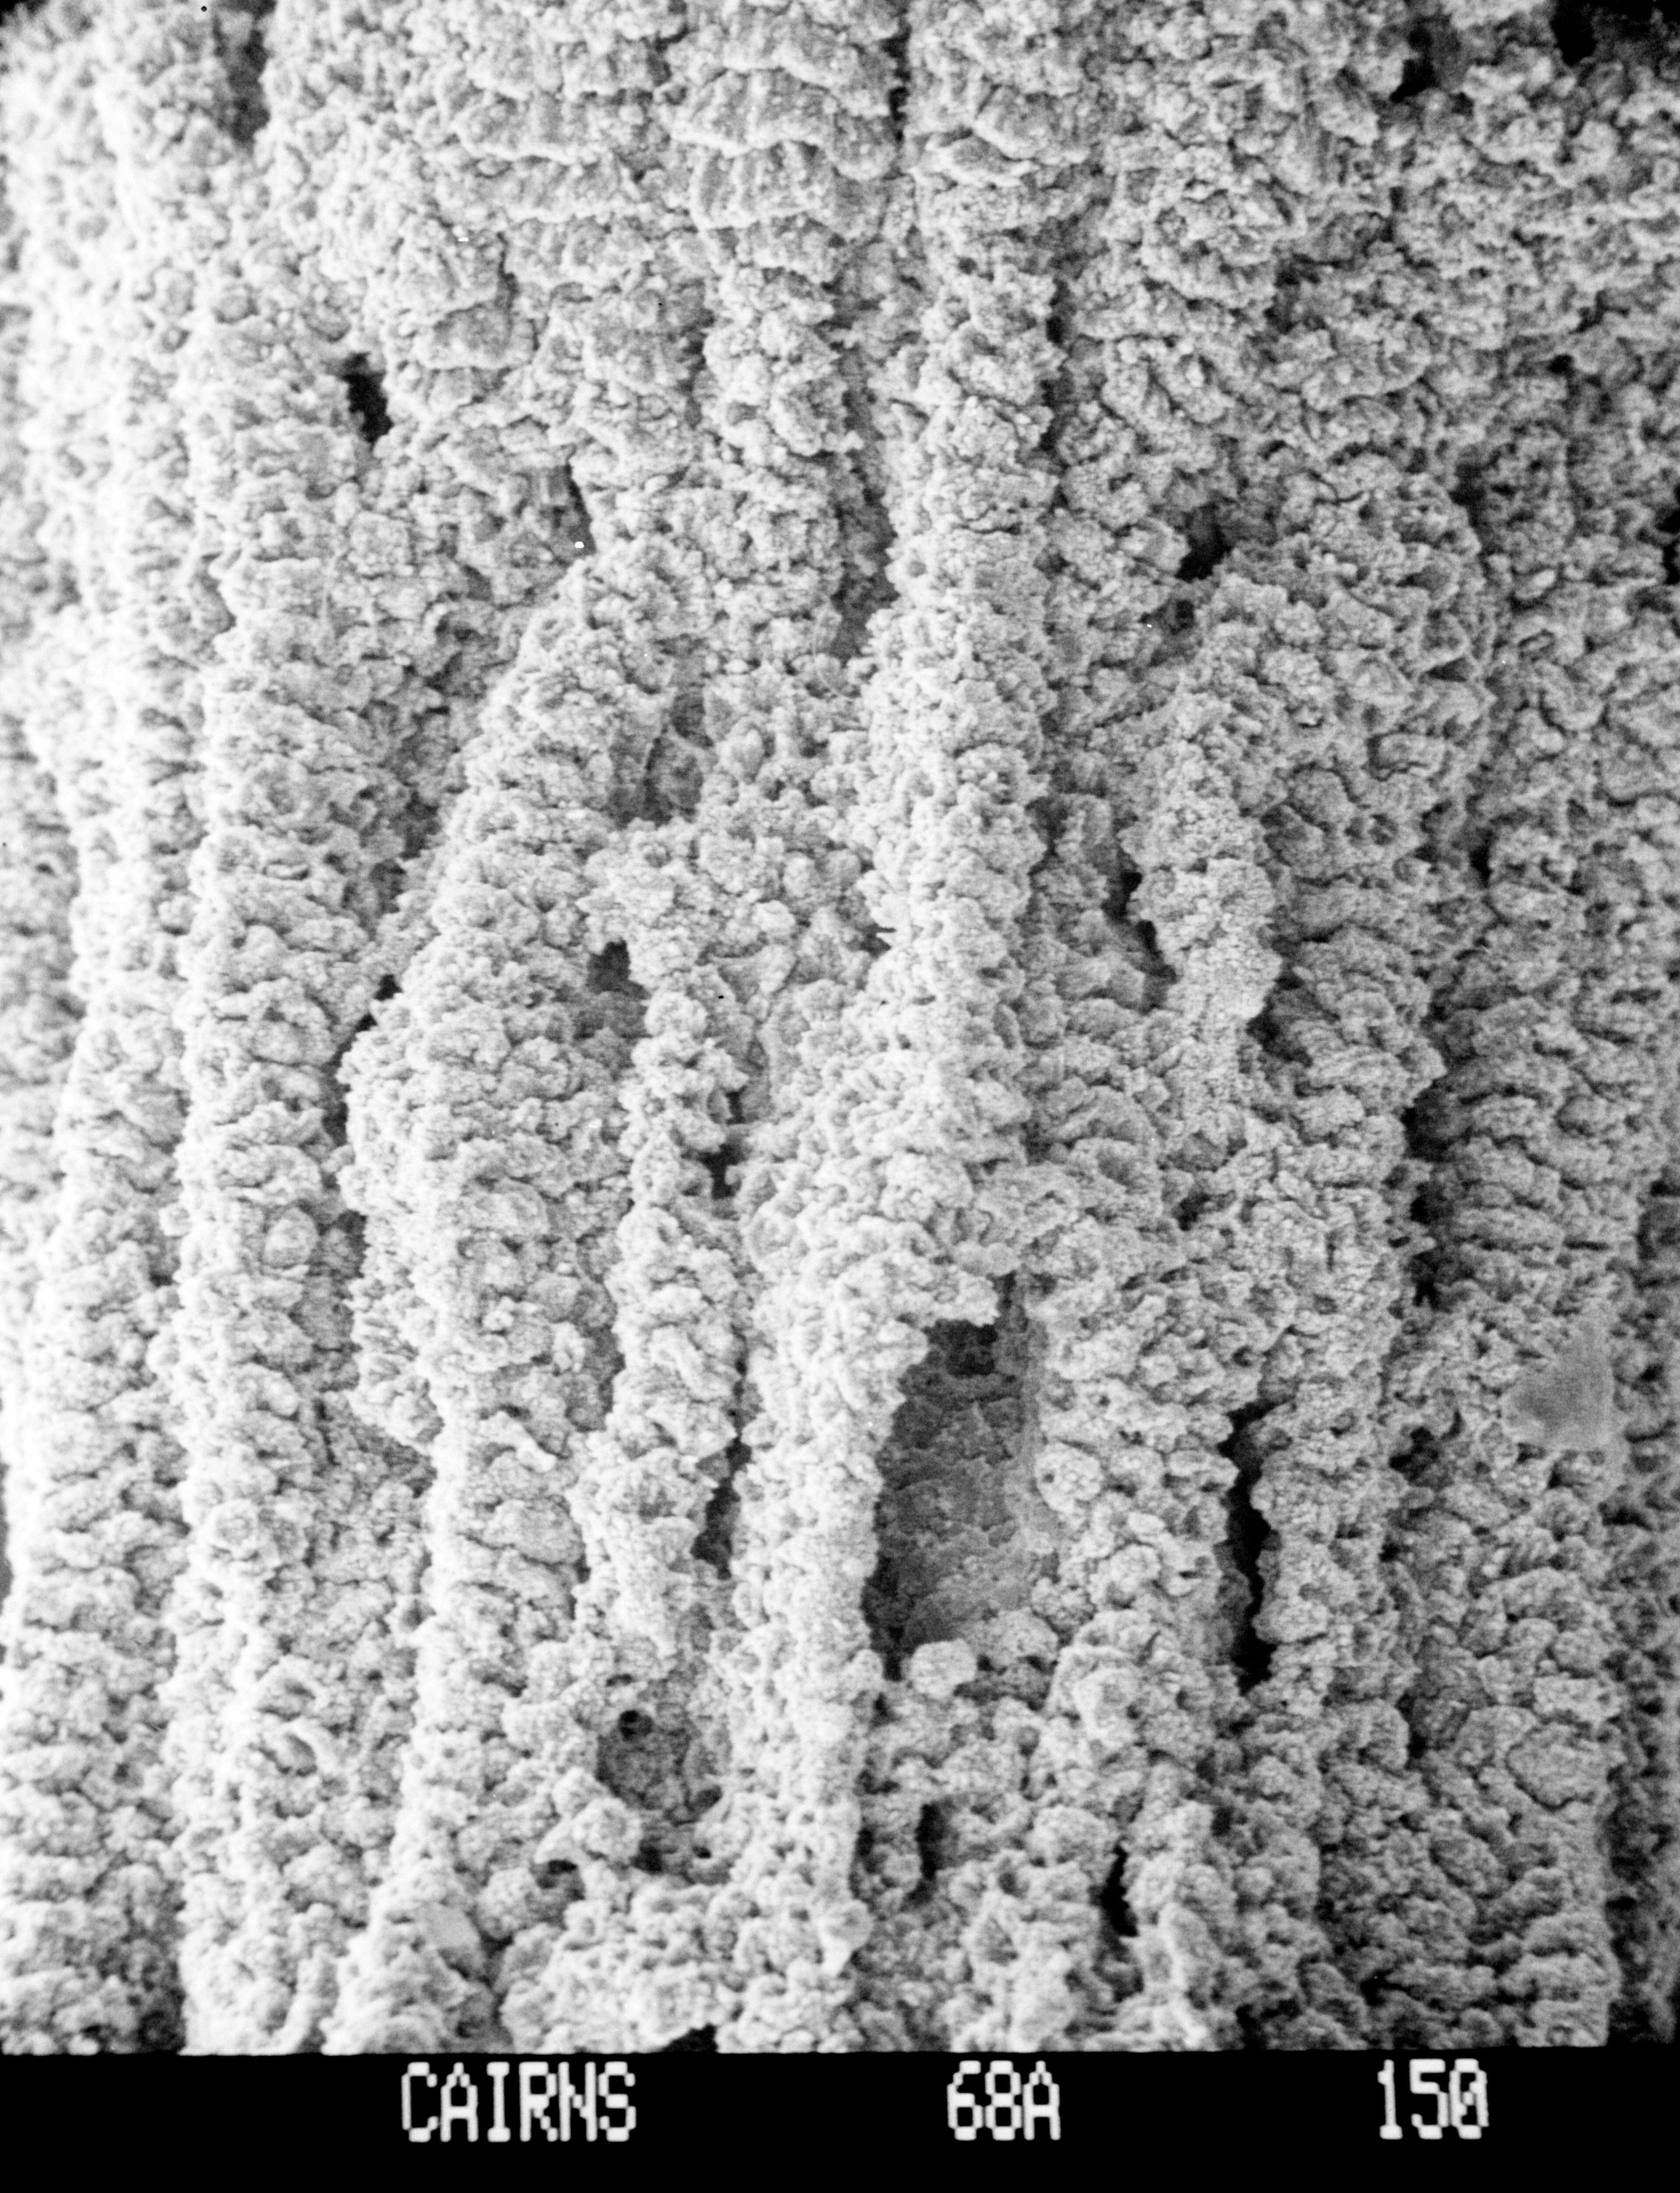 Image of hydrozoans